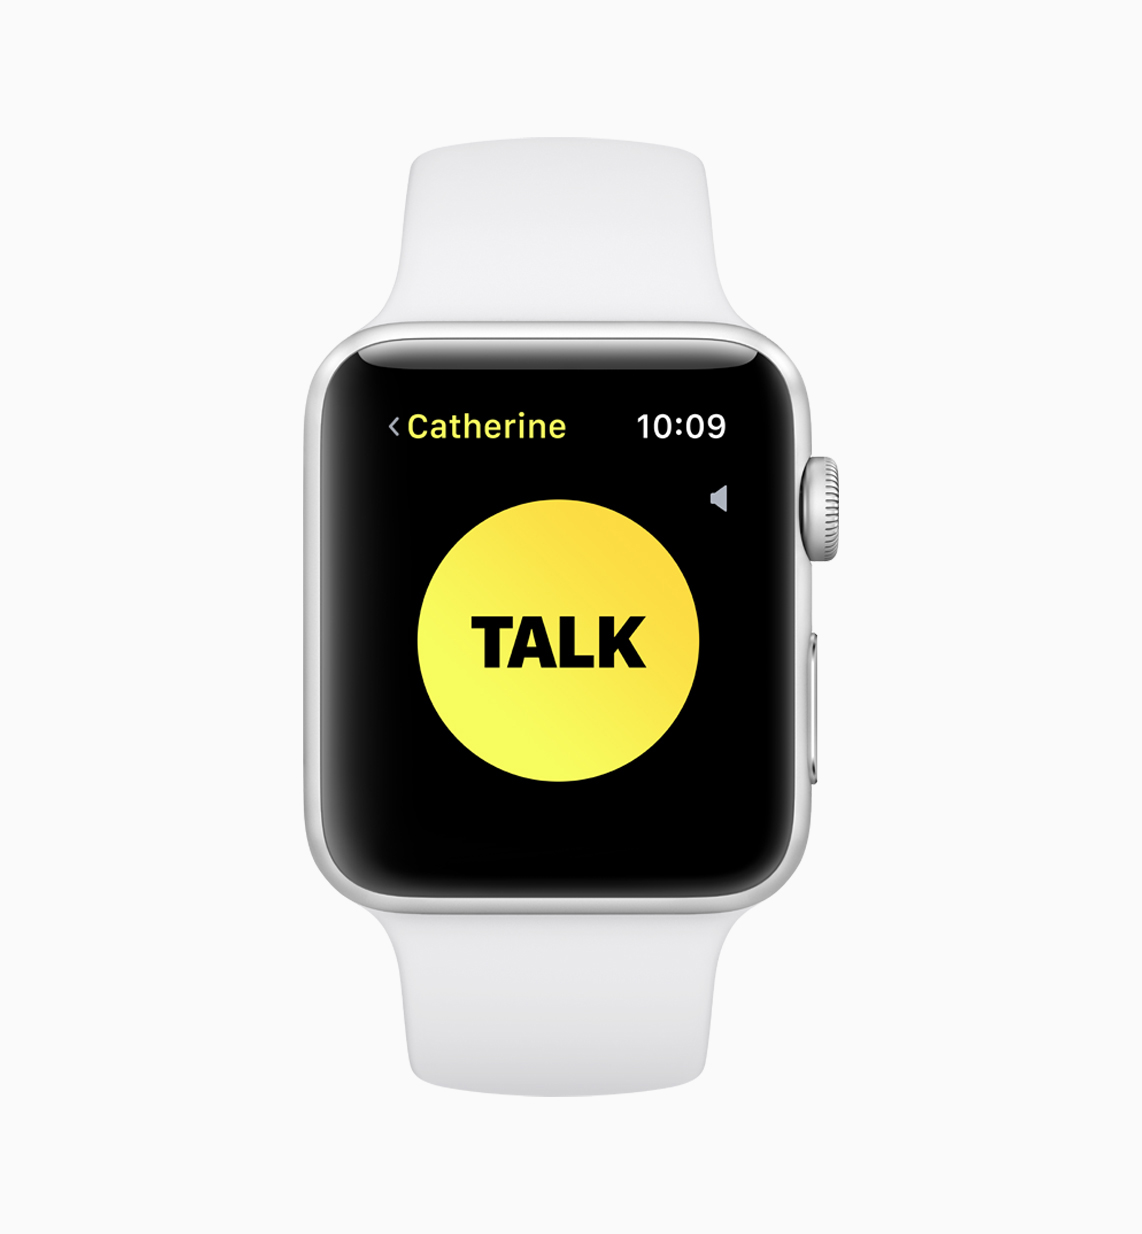 Apple Unveils watchOS 5 With Walkie-Talkie, Activity Competitions, Podcasts, More